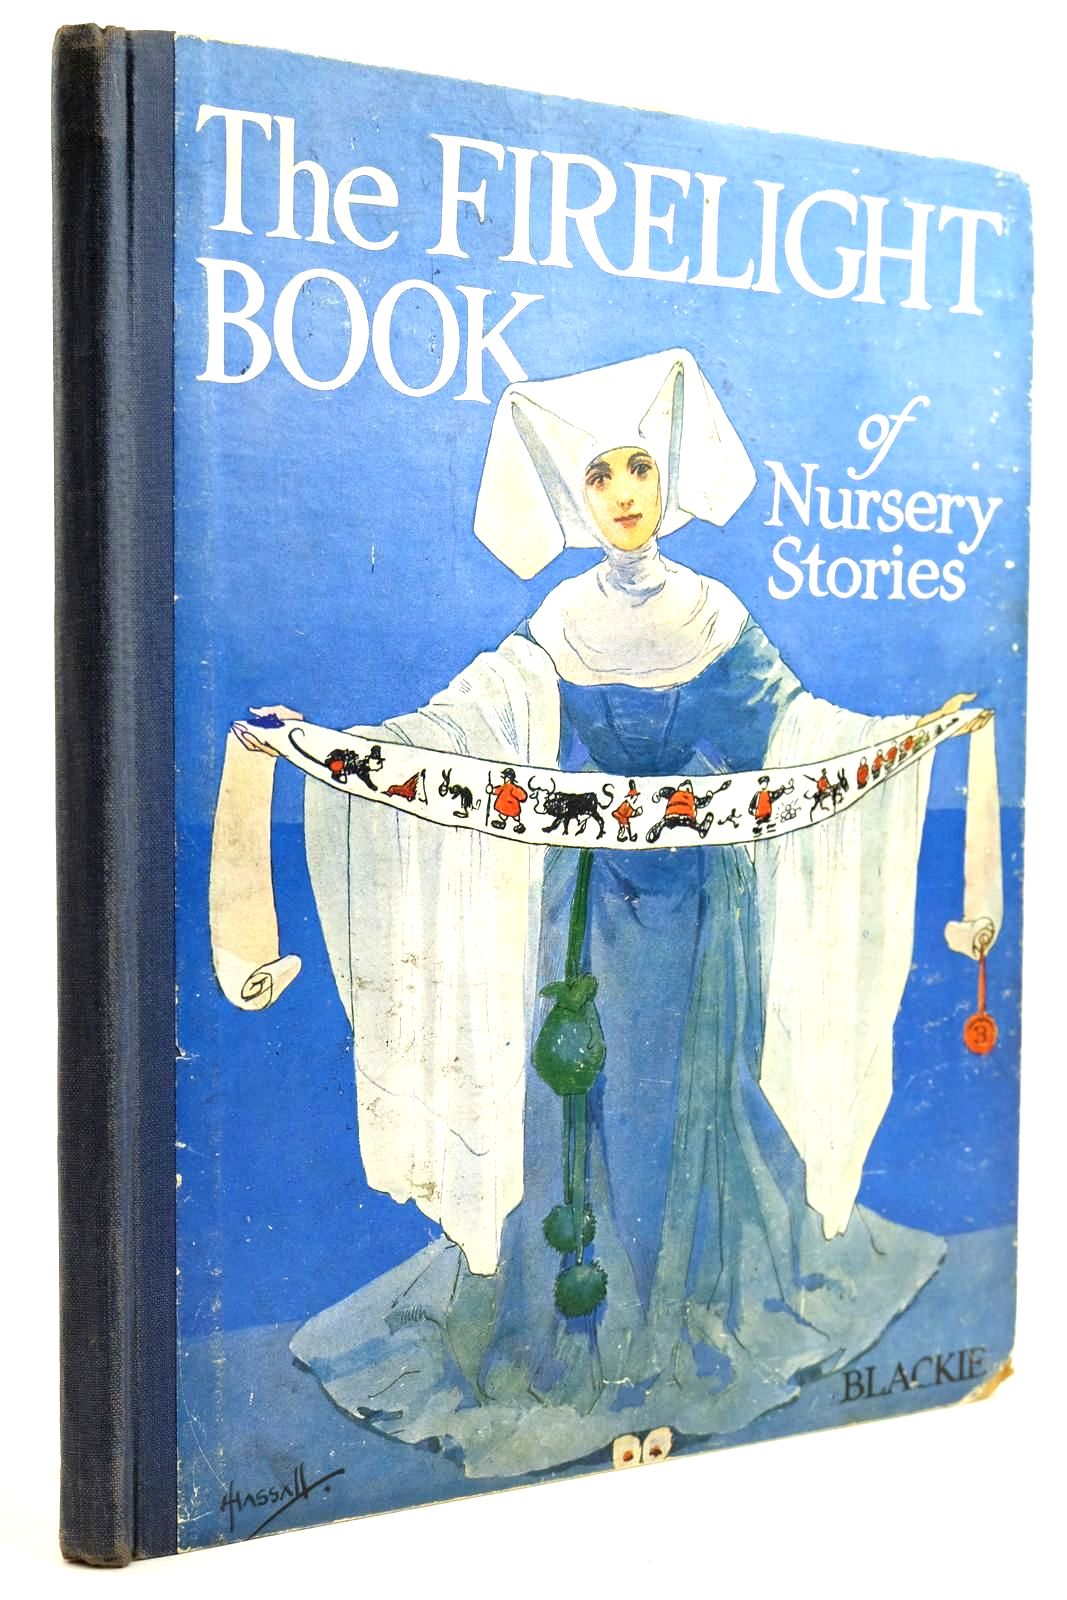 Photo of THE FIRELIGHT BOOK OF NURSERY STORIES illustrated by Hassall, John published by Blackie & Son Ltd. (STOCK CODE: 2132133)  for sale by Stella & Rose's Books